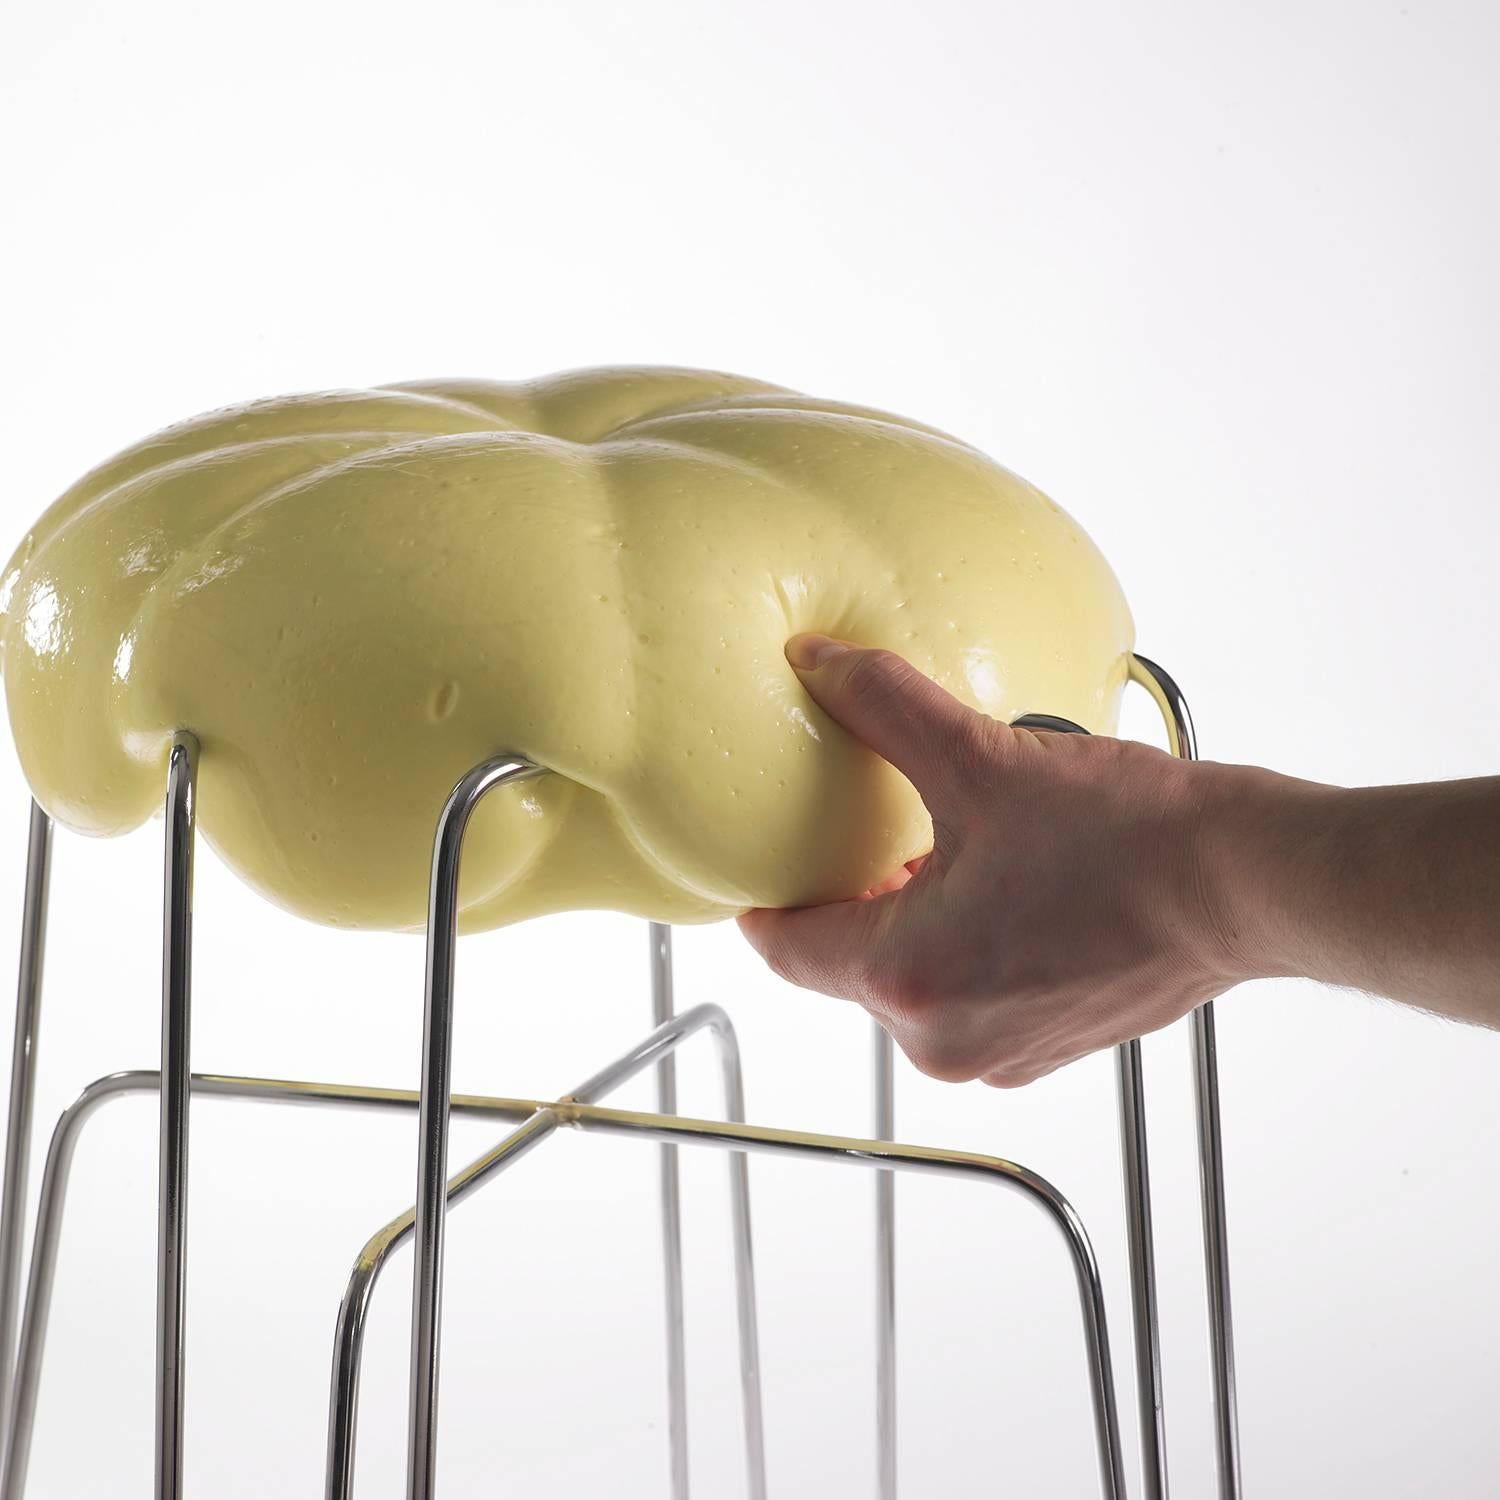 Marshmallow stool by Paul Ketz in Tennislove polyurethane foam and steel.

Designed by Paul Ketz
Contemporary, Germany, 2016
Polyurethane foam (non-toxic, UV stabile), steel
Measures: H 19.25 in, W 14.5 in, D 14.5 in

Each stool is unique as there